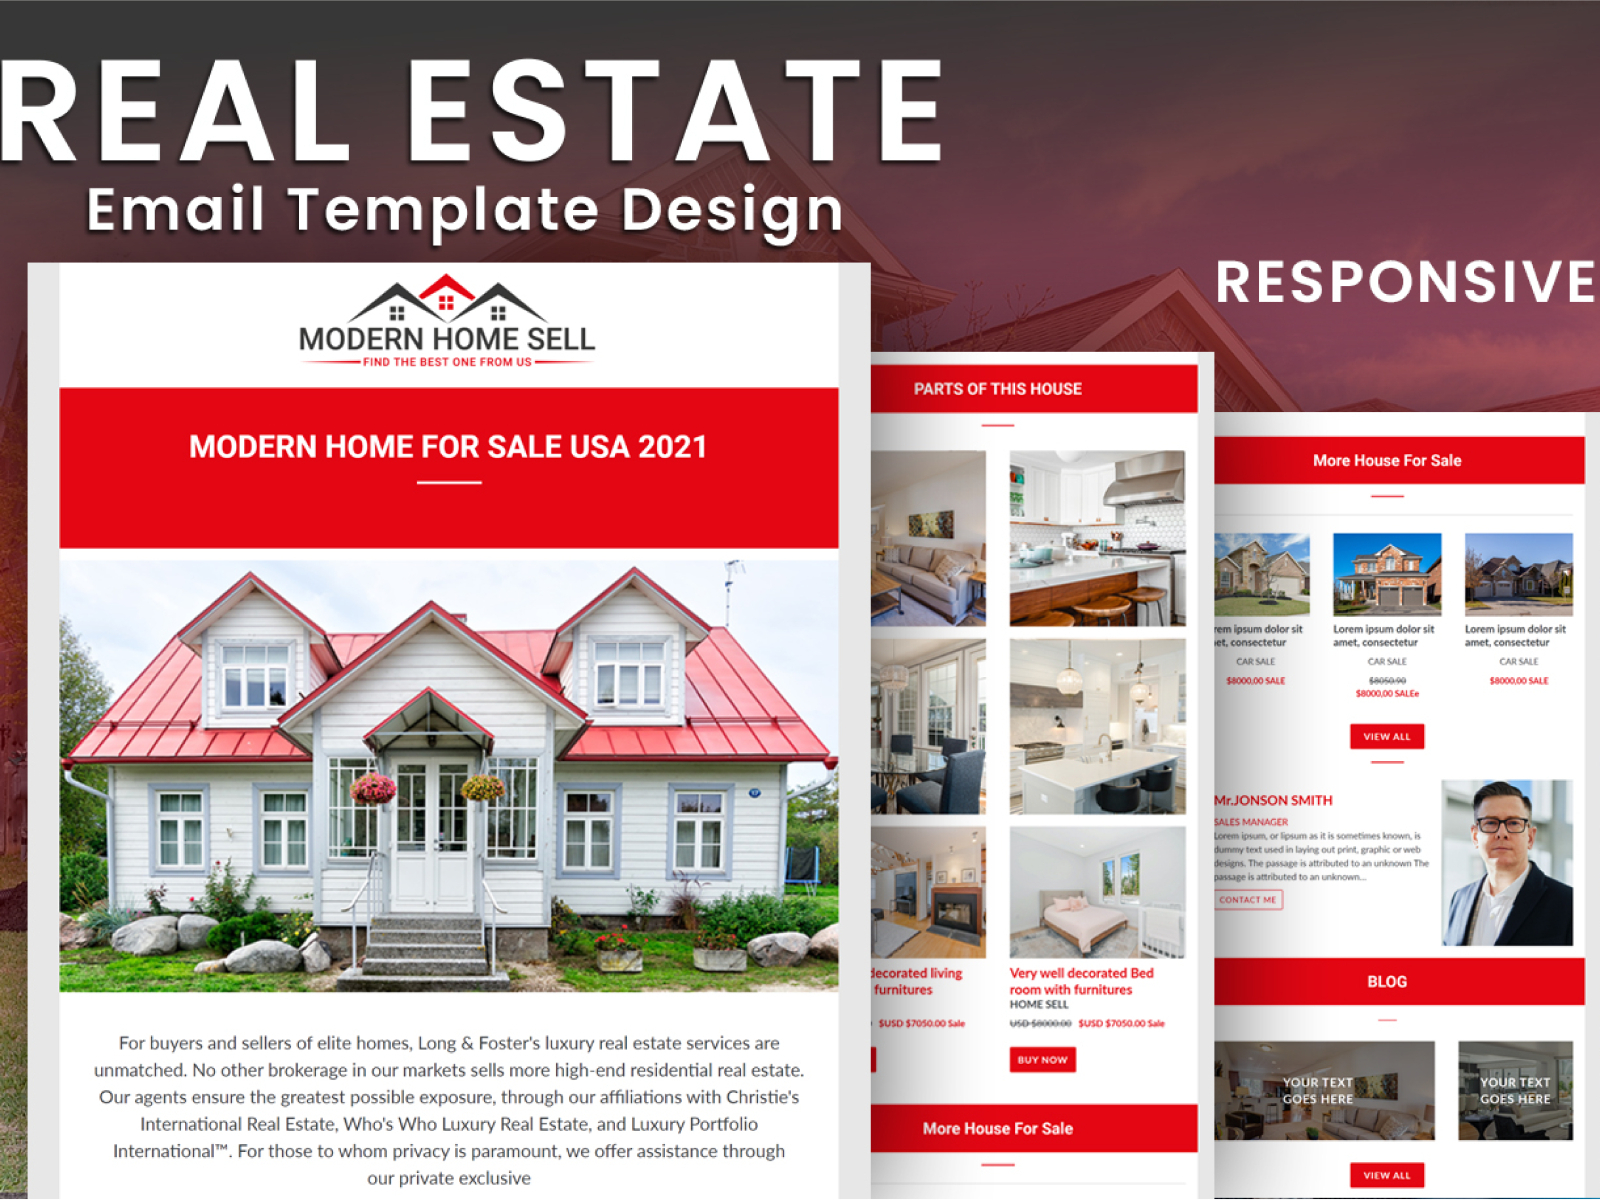 real-estate-mailchimp-email-template-design-by-belal-ahmed-on-dribbble